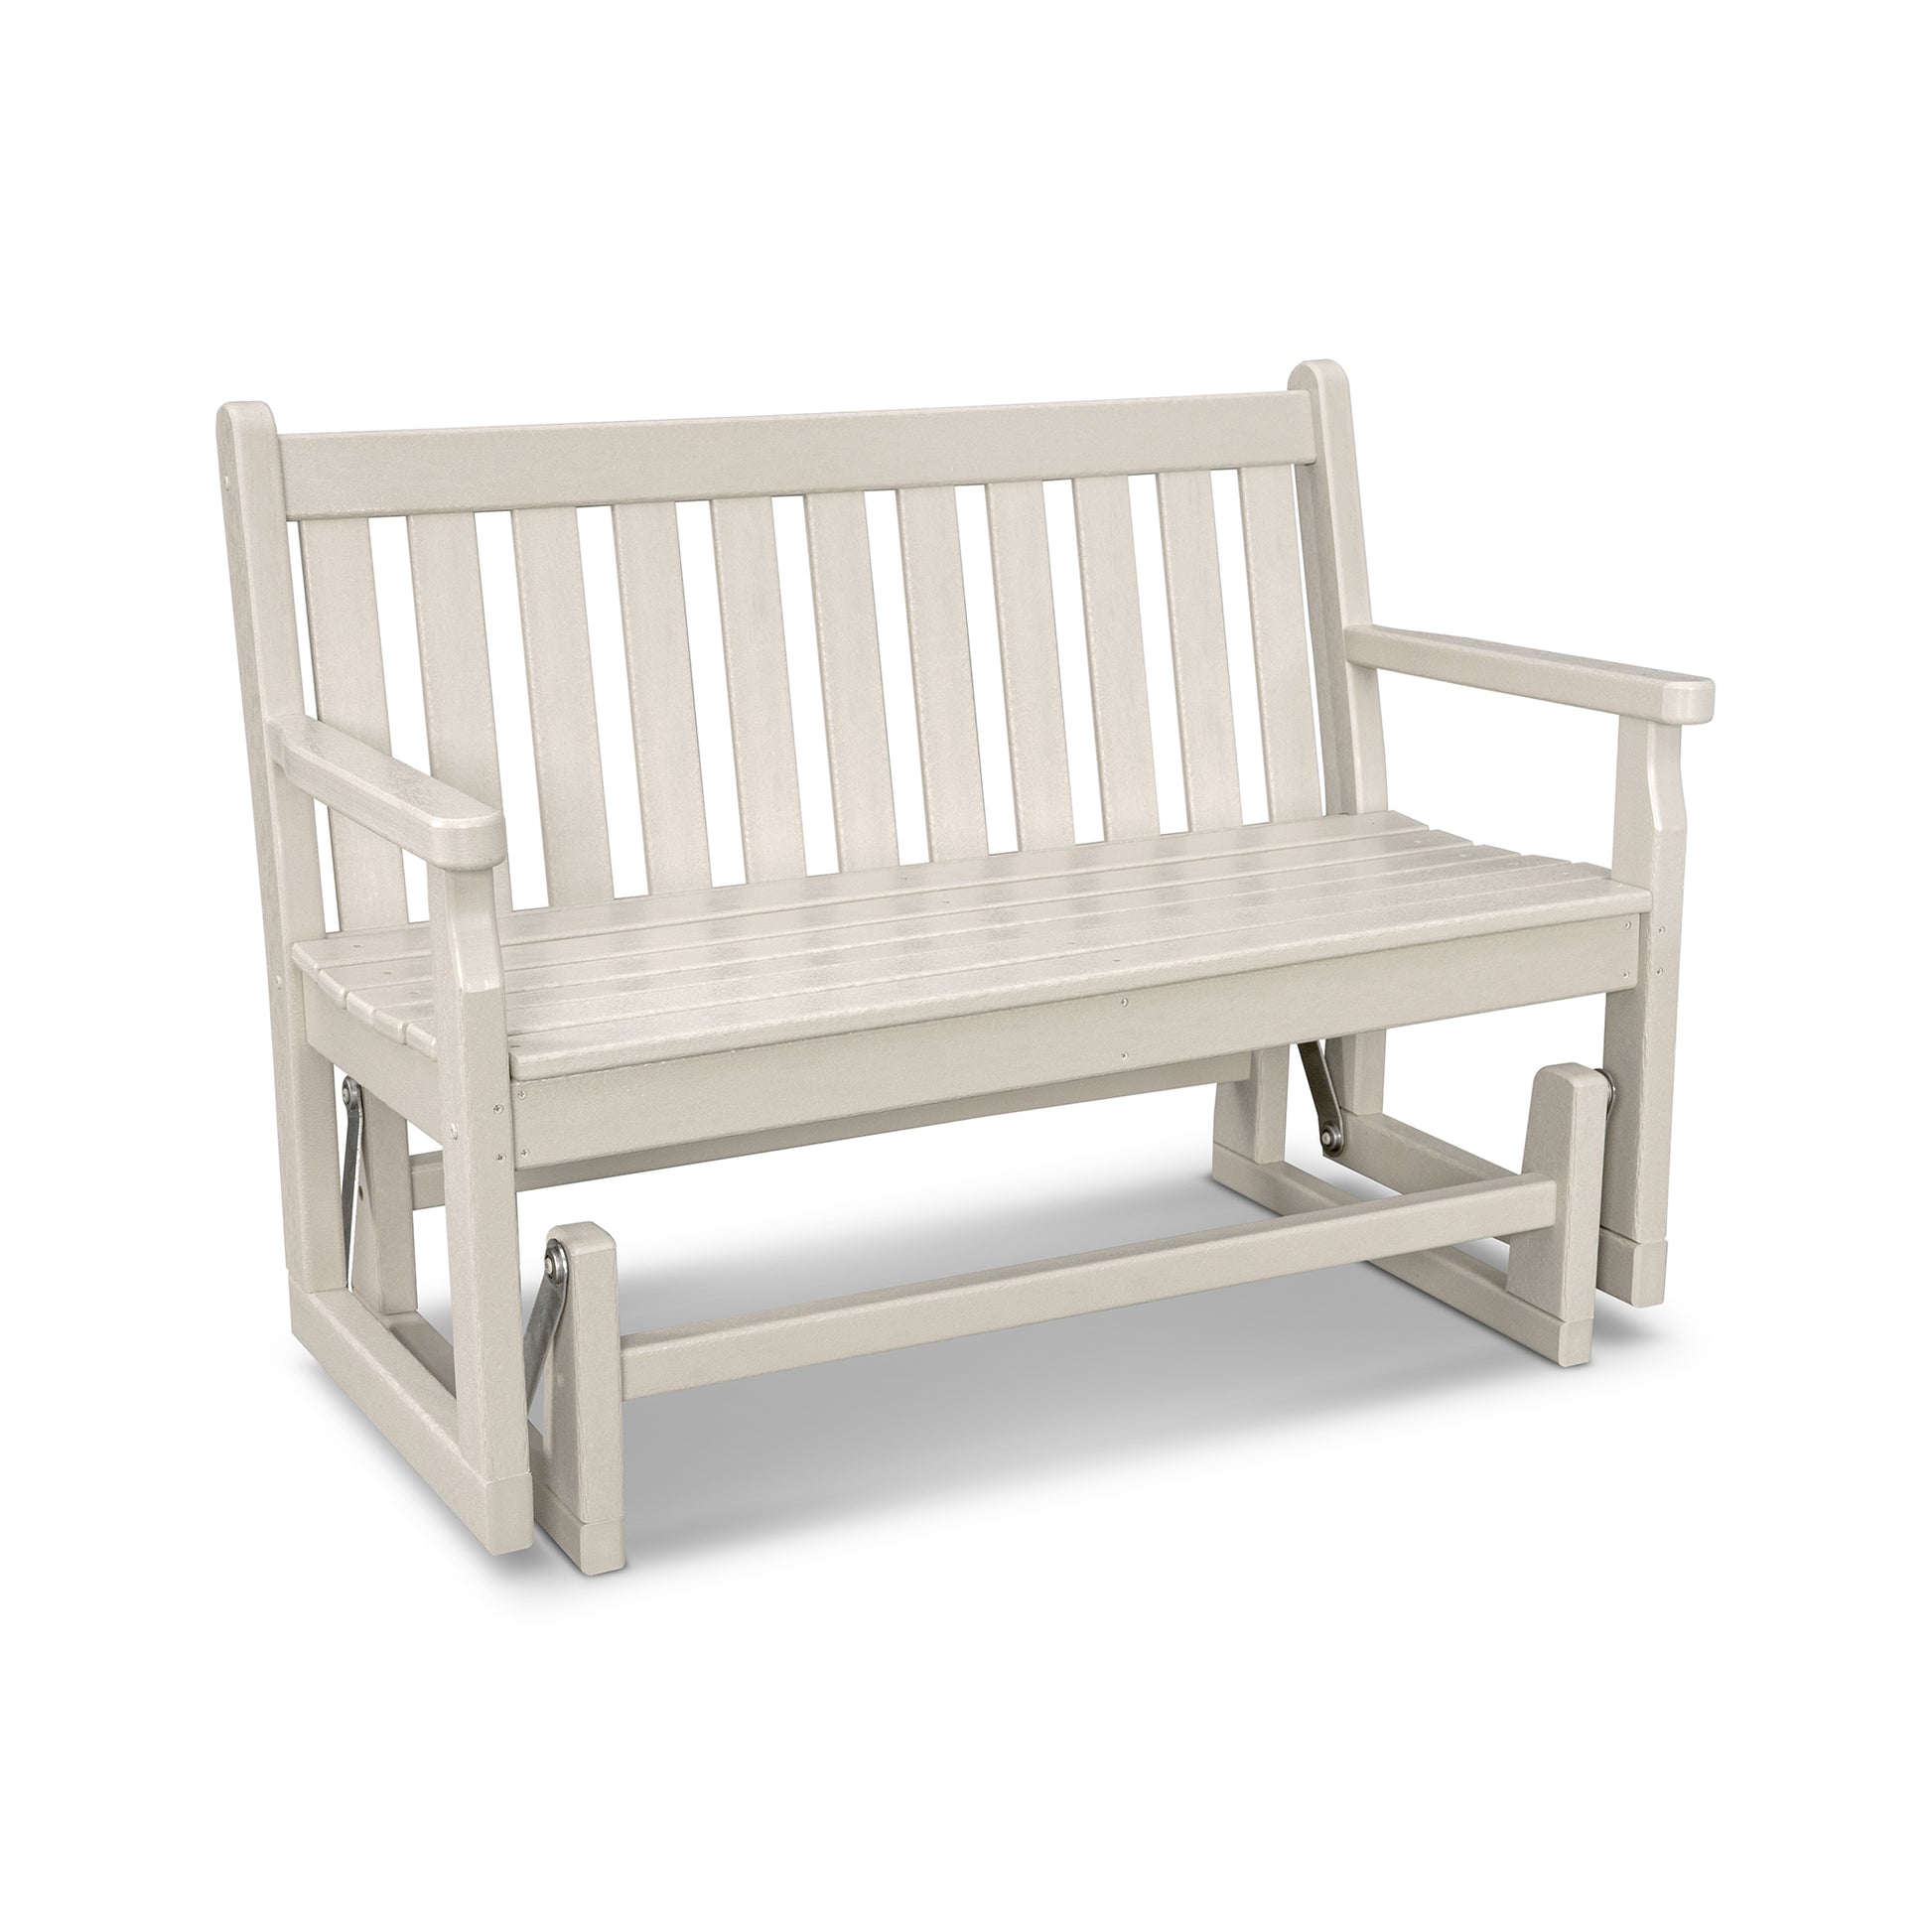 A beige POLYWOOD® Traditional Garden 48" Glider Bench with vertical back slats and armrests, isolated on a white background.